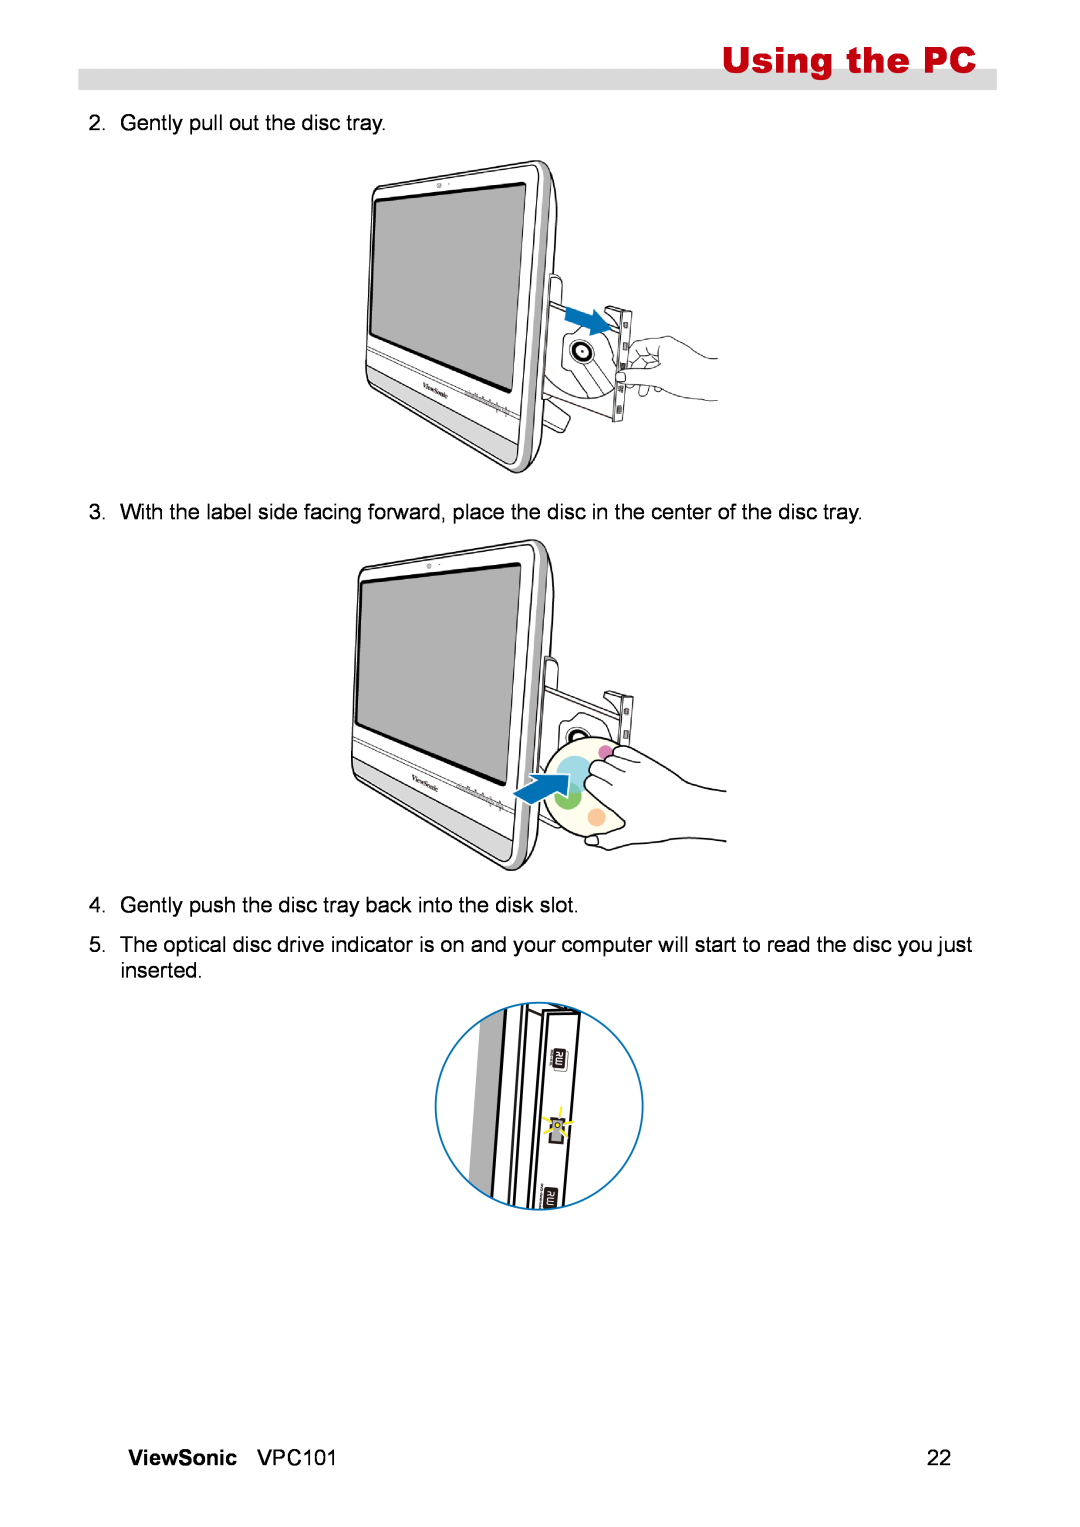 ViewSonic VPC101 manual Using the PC, Gently pull out the disc tray, Gently push the disc tray back into the disk slot 